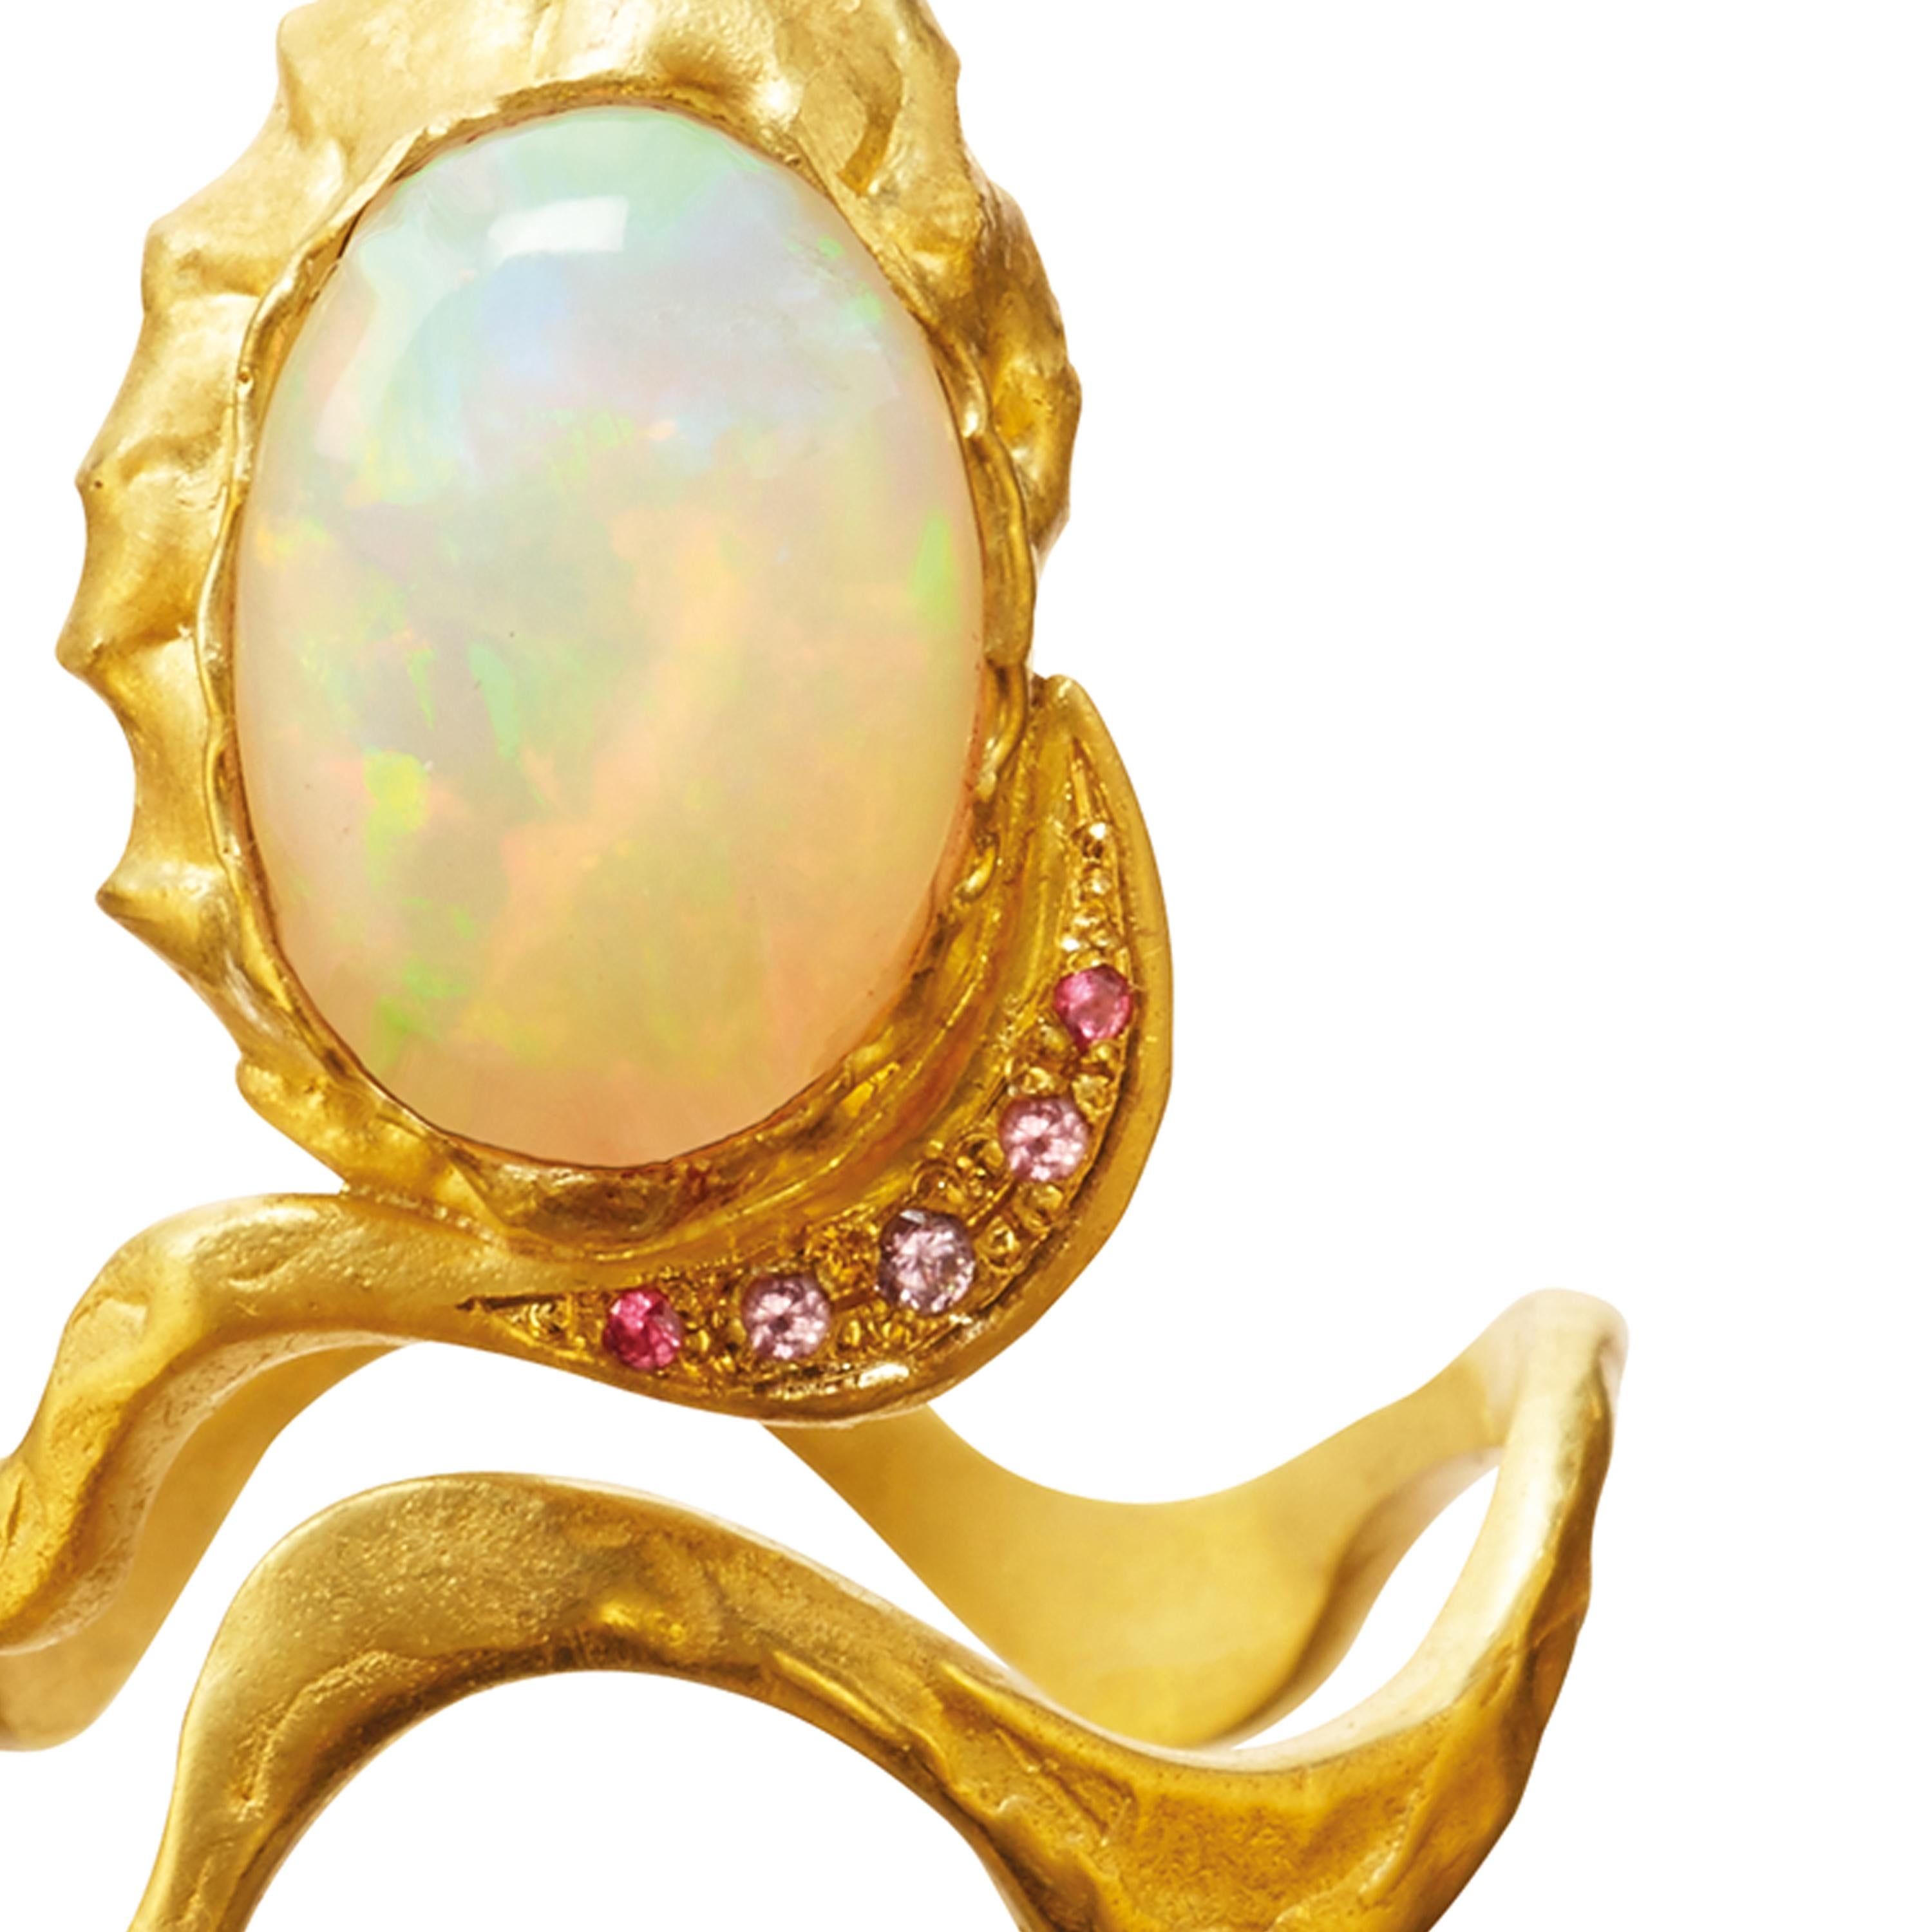 The Opal Eye ring is handcrafted in 18k gold, studded with 5  x spinels & 1 white water opal. It is beautiful on its own or combined with other ELHANATI rings.

The ring is from Mark Me Pink, the second edition of Mark Me Sky, inspired by the latest